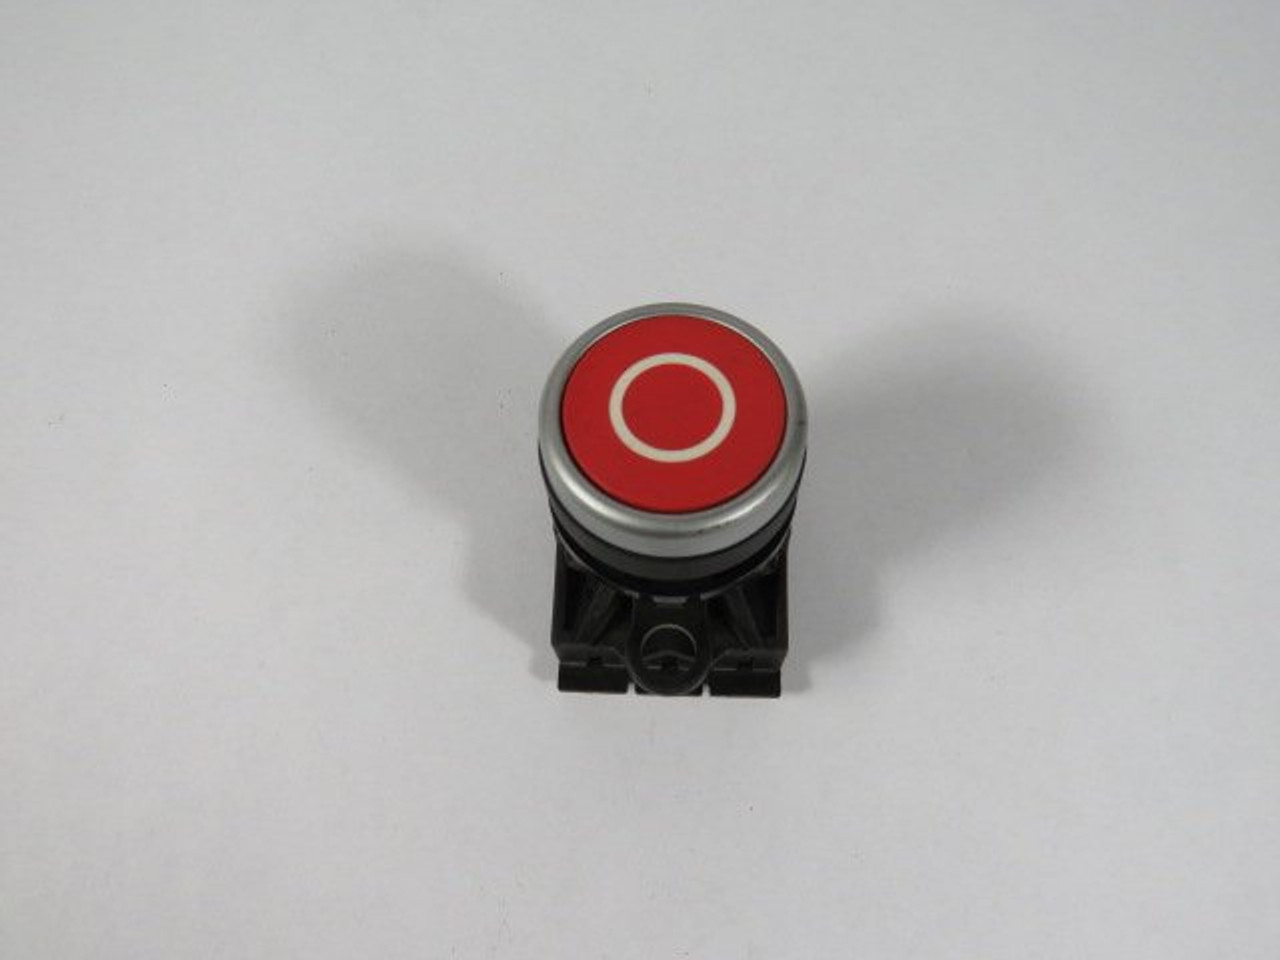 Eaton A22-RD-10 Red Push Button Operator w/ O Marking USED